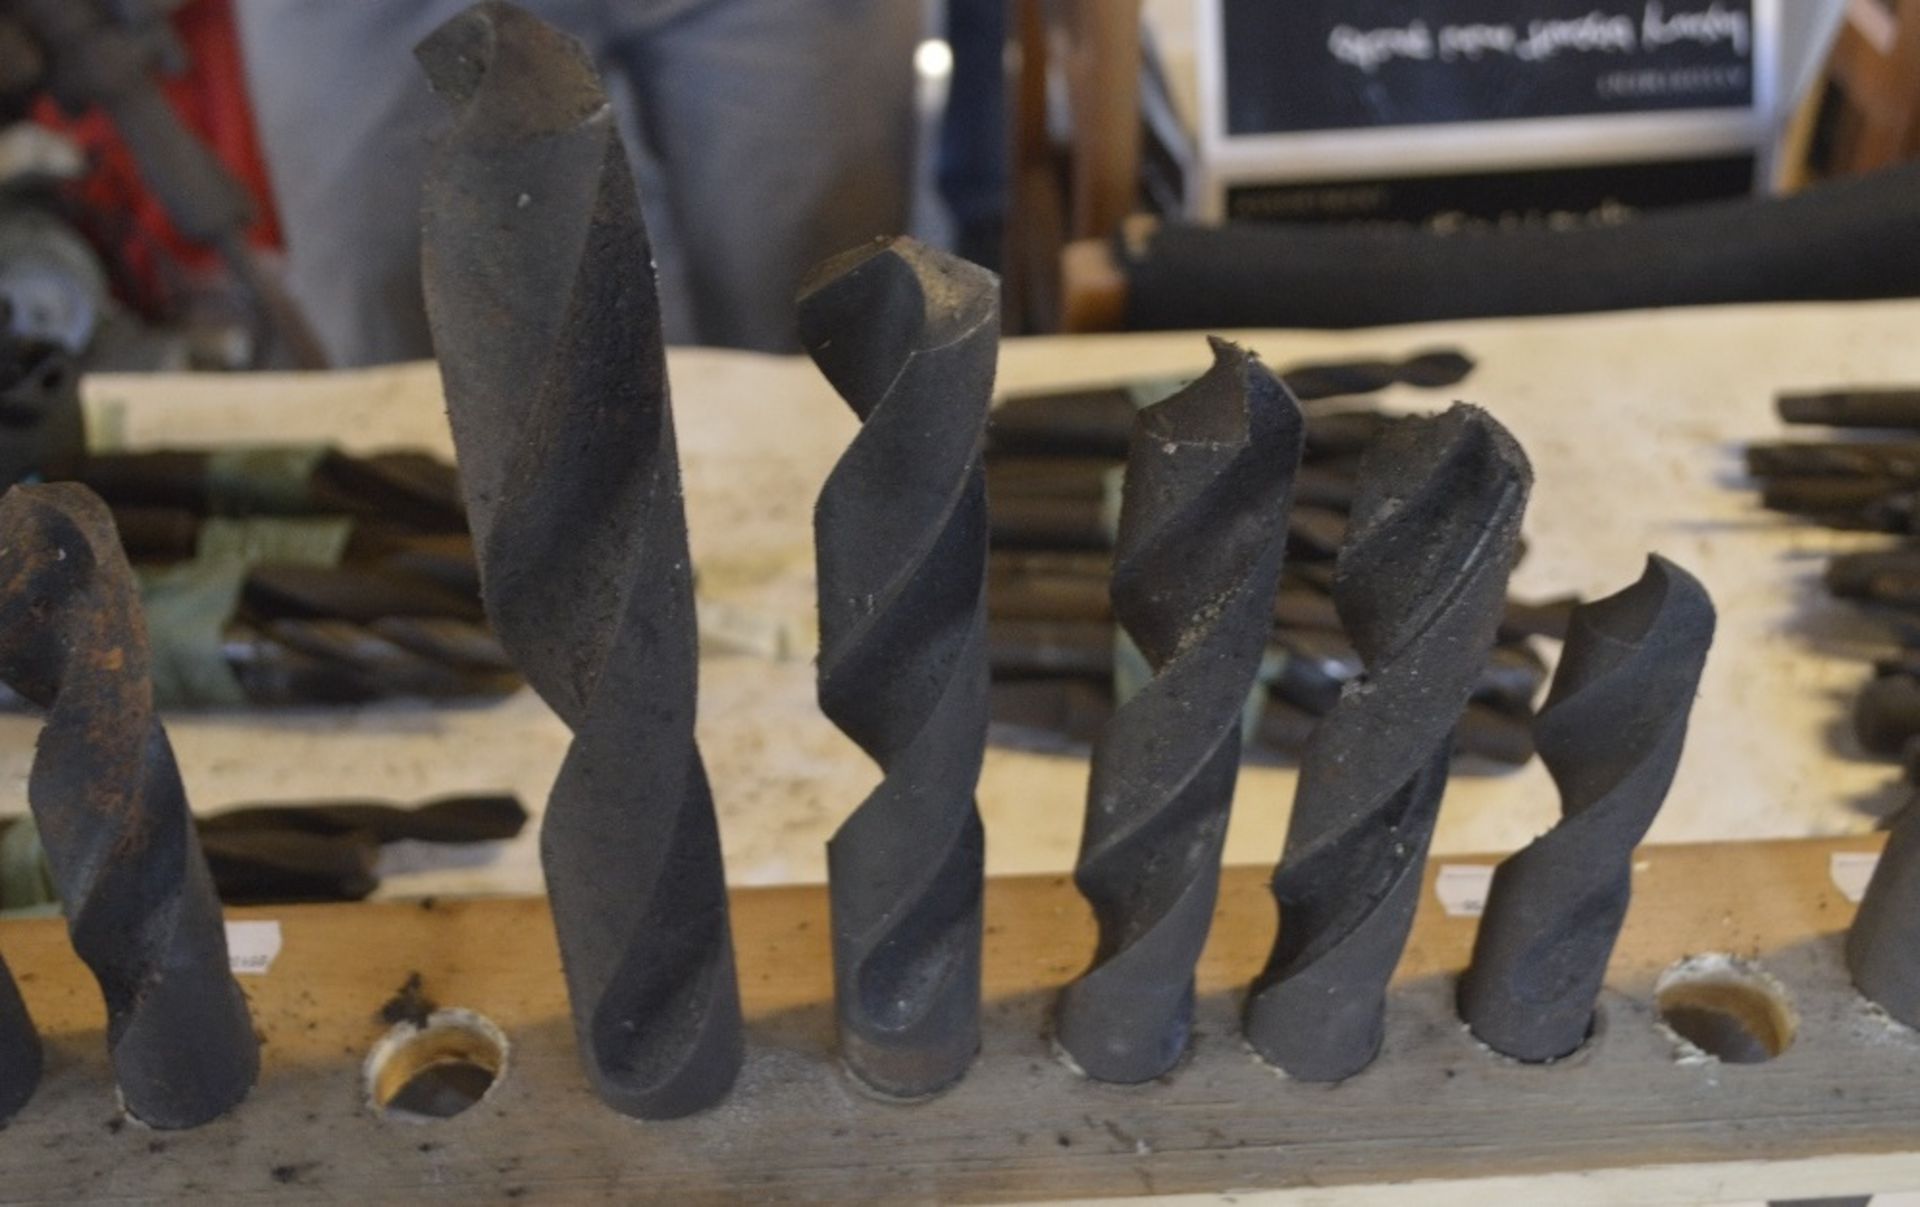 Five taper shank drill bits, length of longest approx. 16" (5).